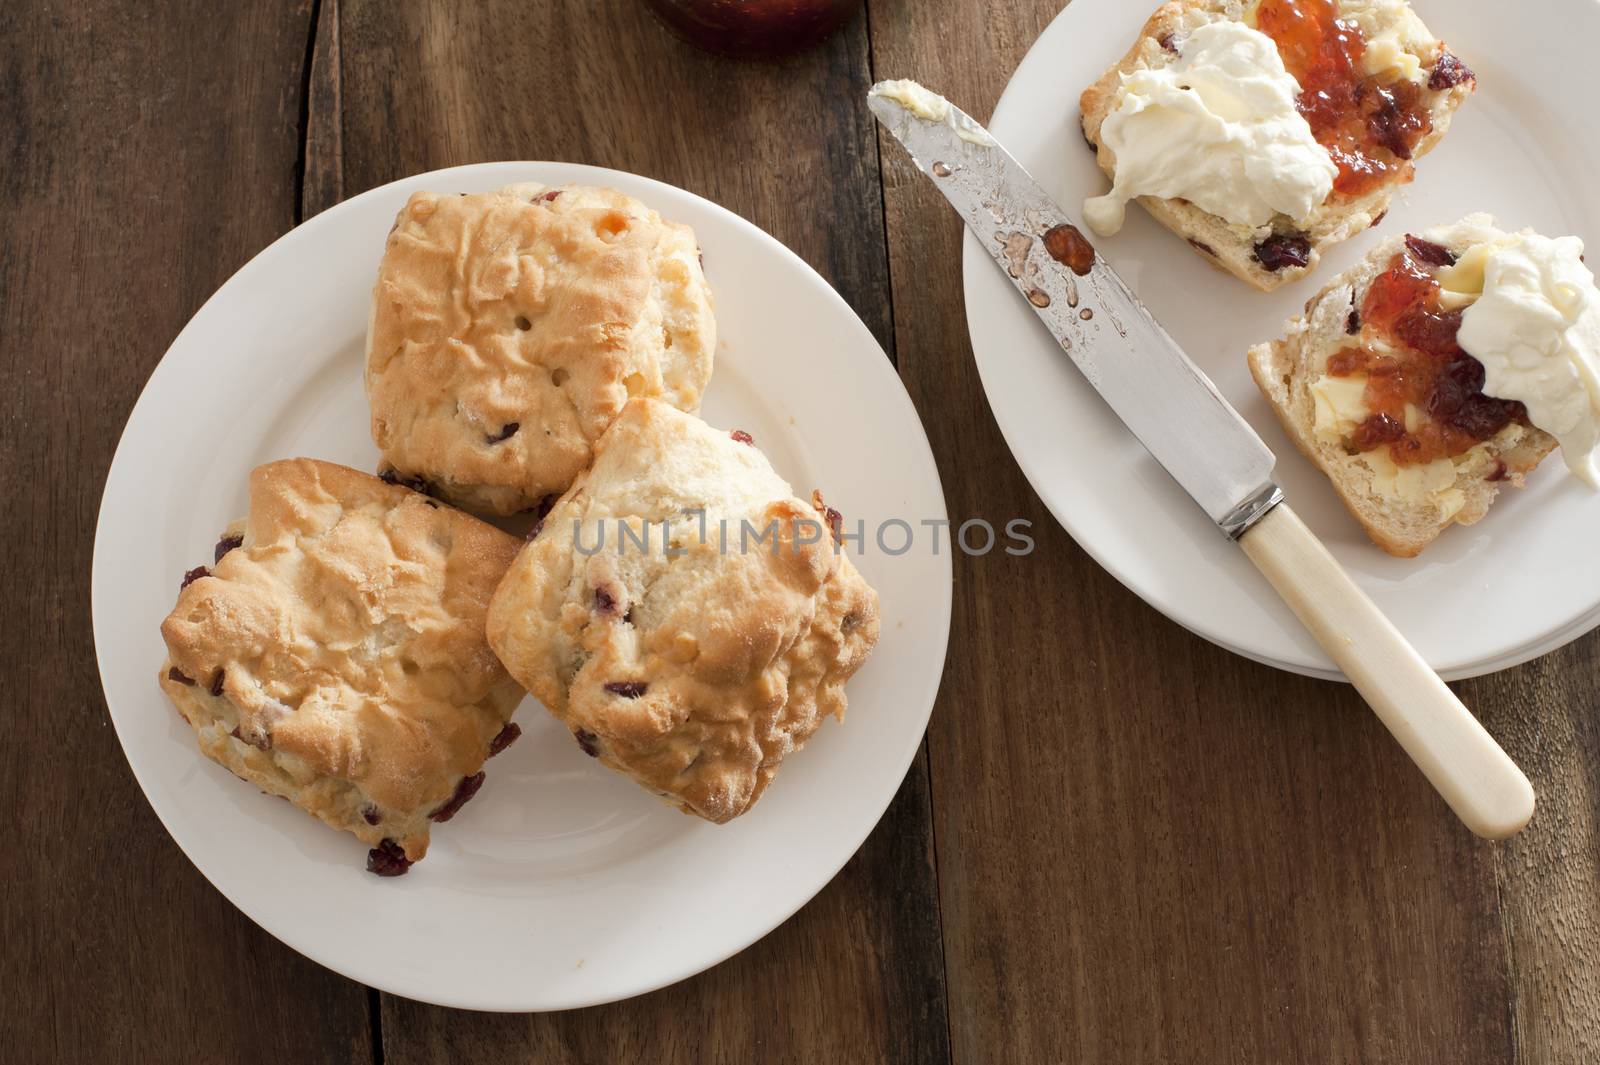 Freshly baked rock cakes or fruit scones on a plate with a single buttered cake alongside with jam and whipped cream